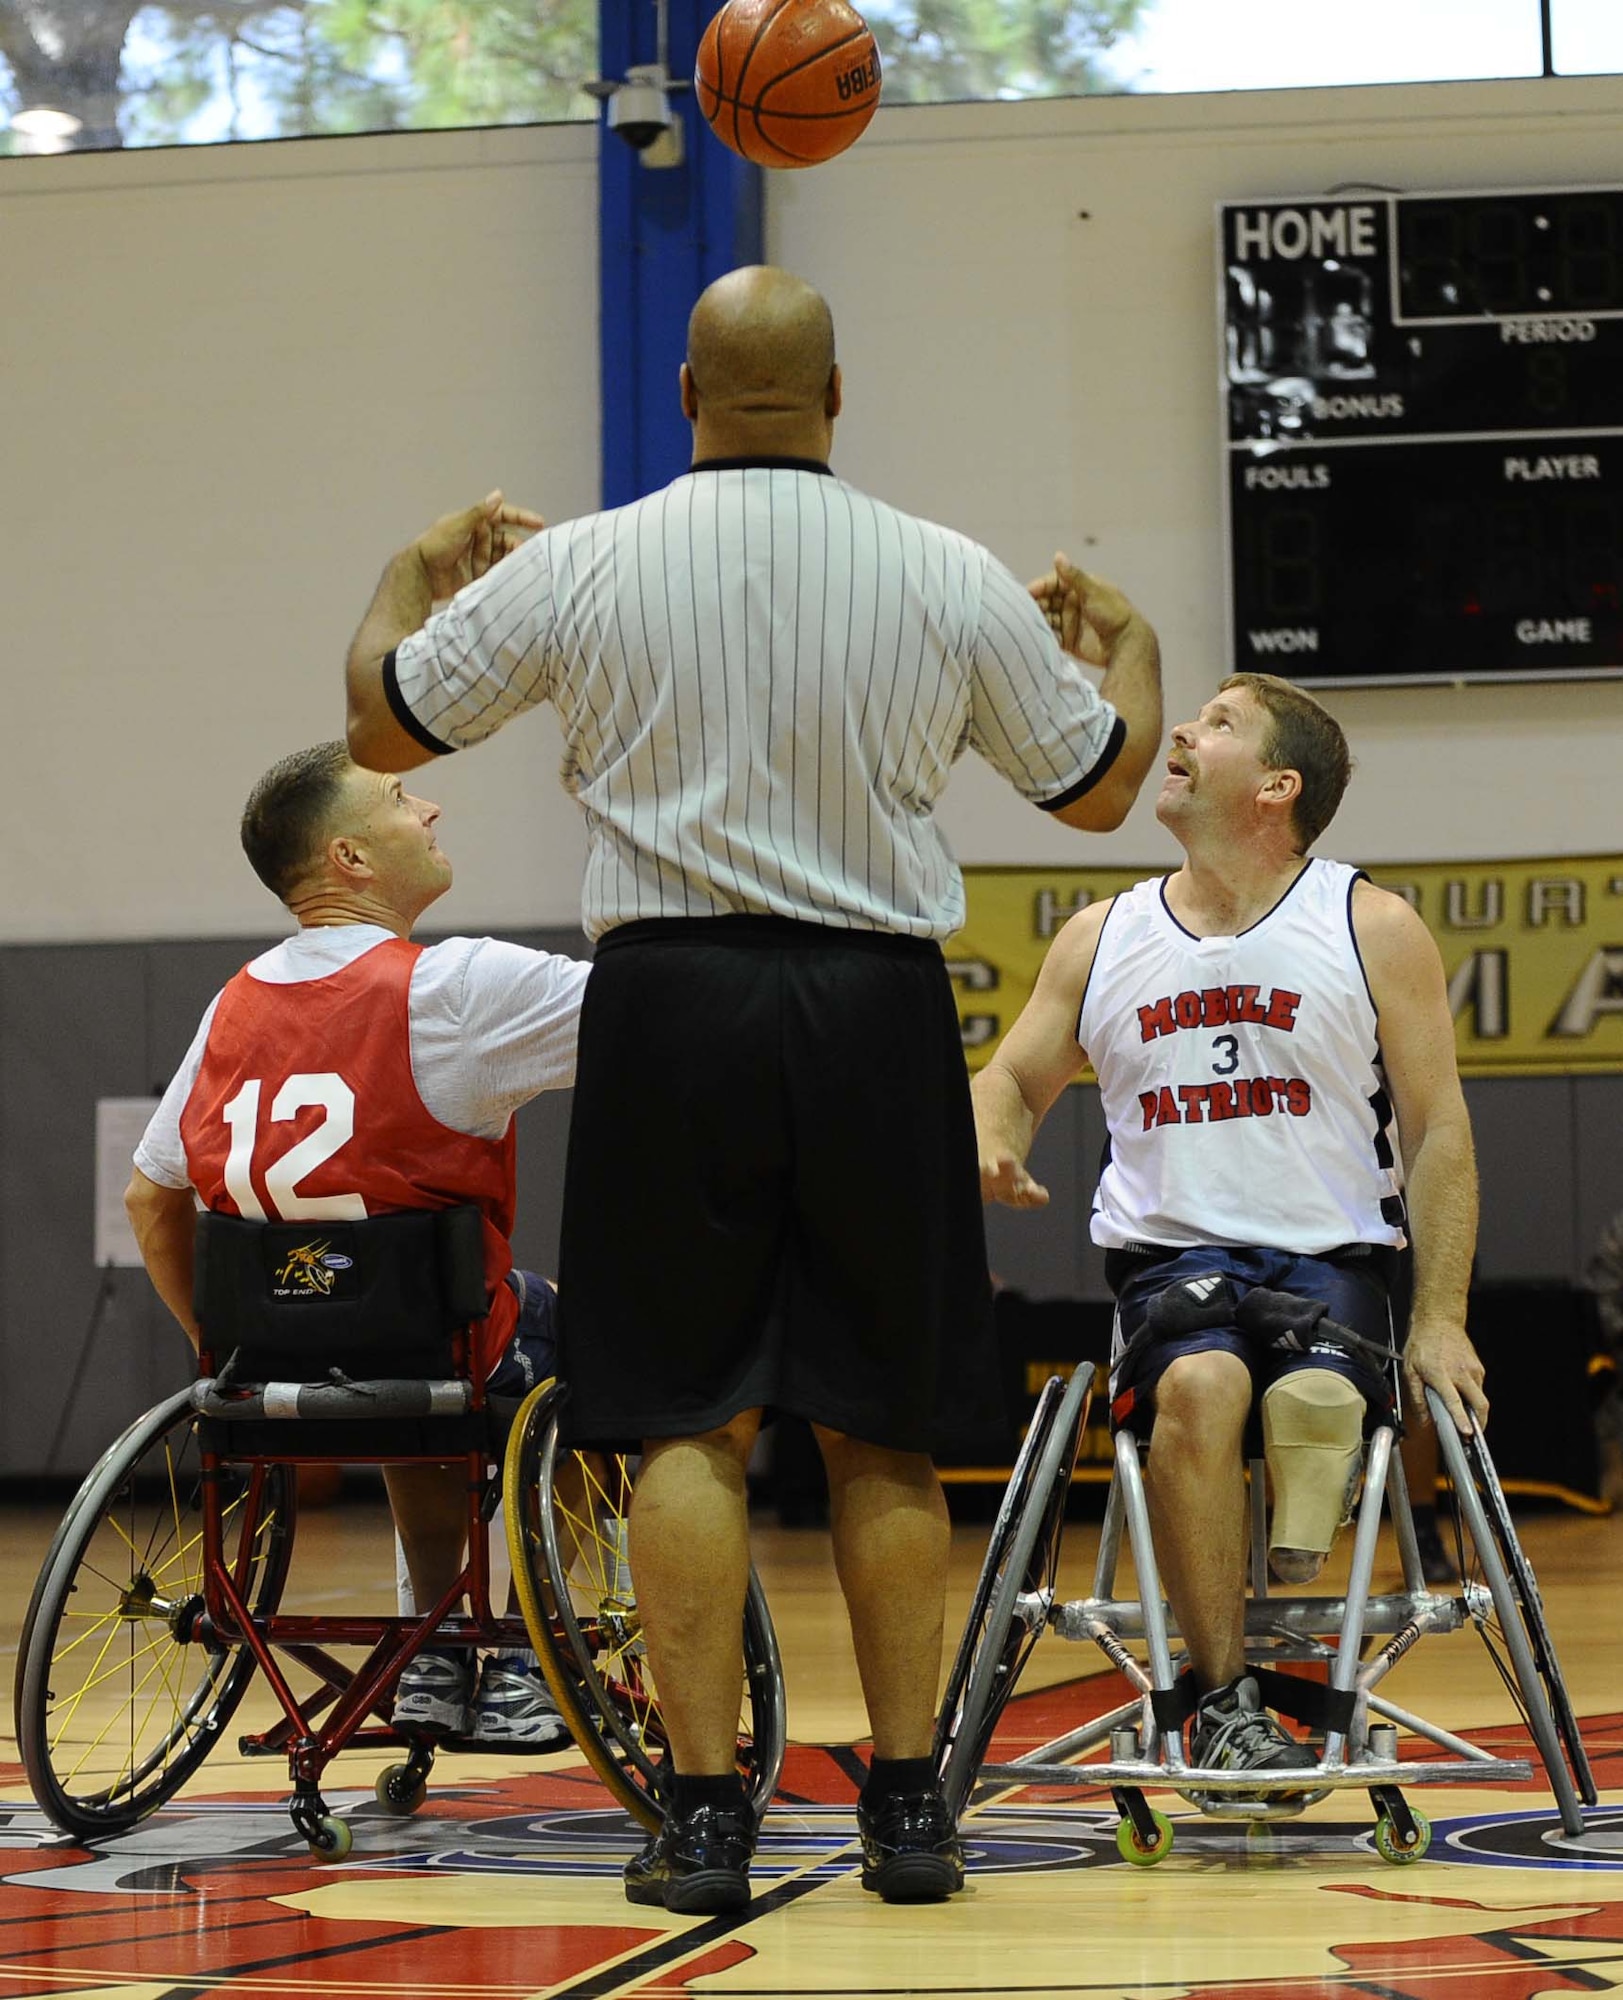 Col. Greg Lengyel, 1st Special Operations Wing commander, prepares to get the ball during the opening tip against a member of the Mobile Patriots, a National Wheelchair Basketball Association team, at the fourth annual Wheelchair Basketball Exhibition Game at the Aderholt Fitness Center at Hurlburt Field Oct. 1.  (U.S. Air Force photo by Senior Airman Julianne Showalter)